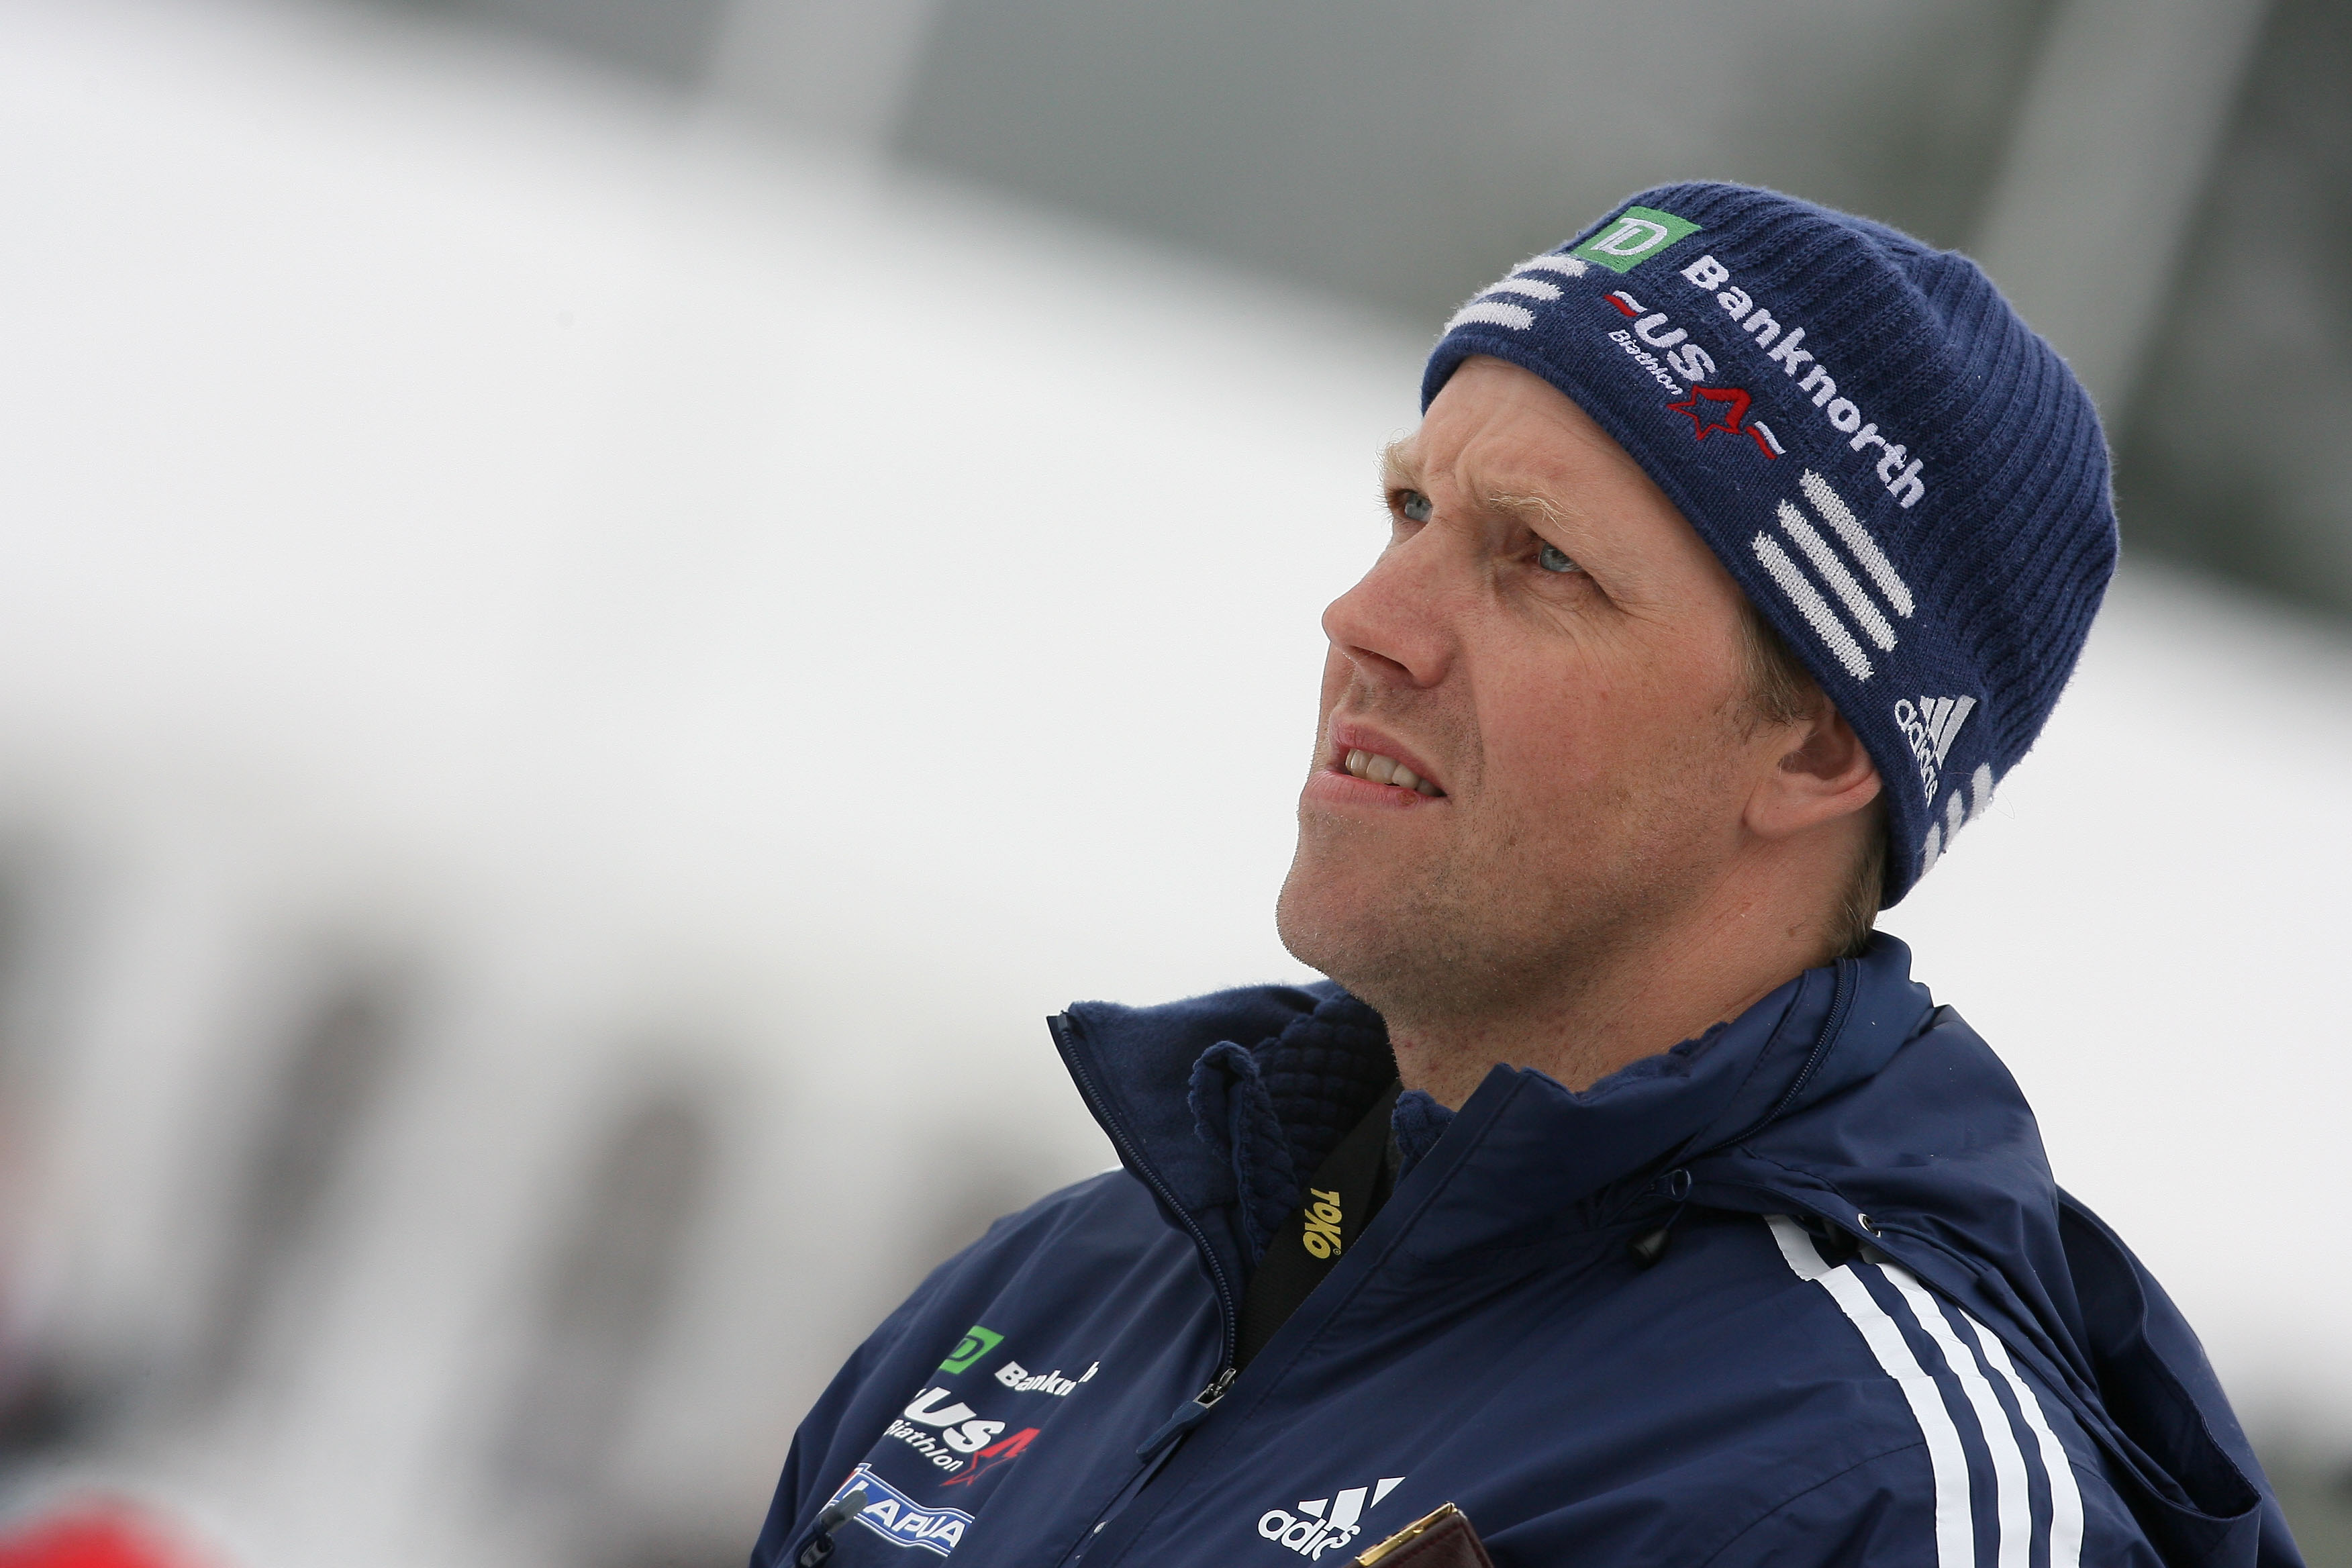 Exclusive Interview: Nilsson, Head of U.S. Biathlon Program, Dishes About Coaching